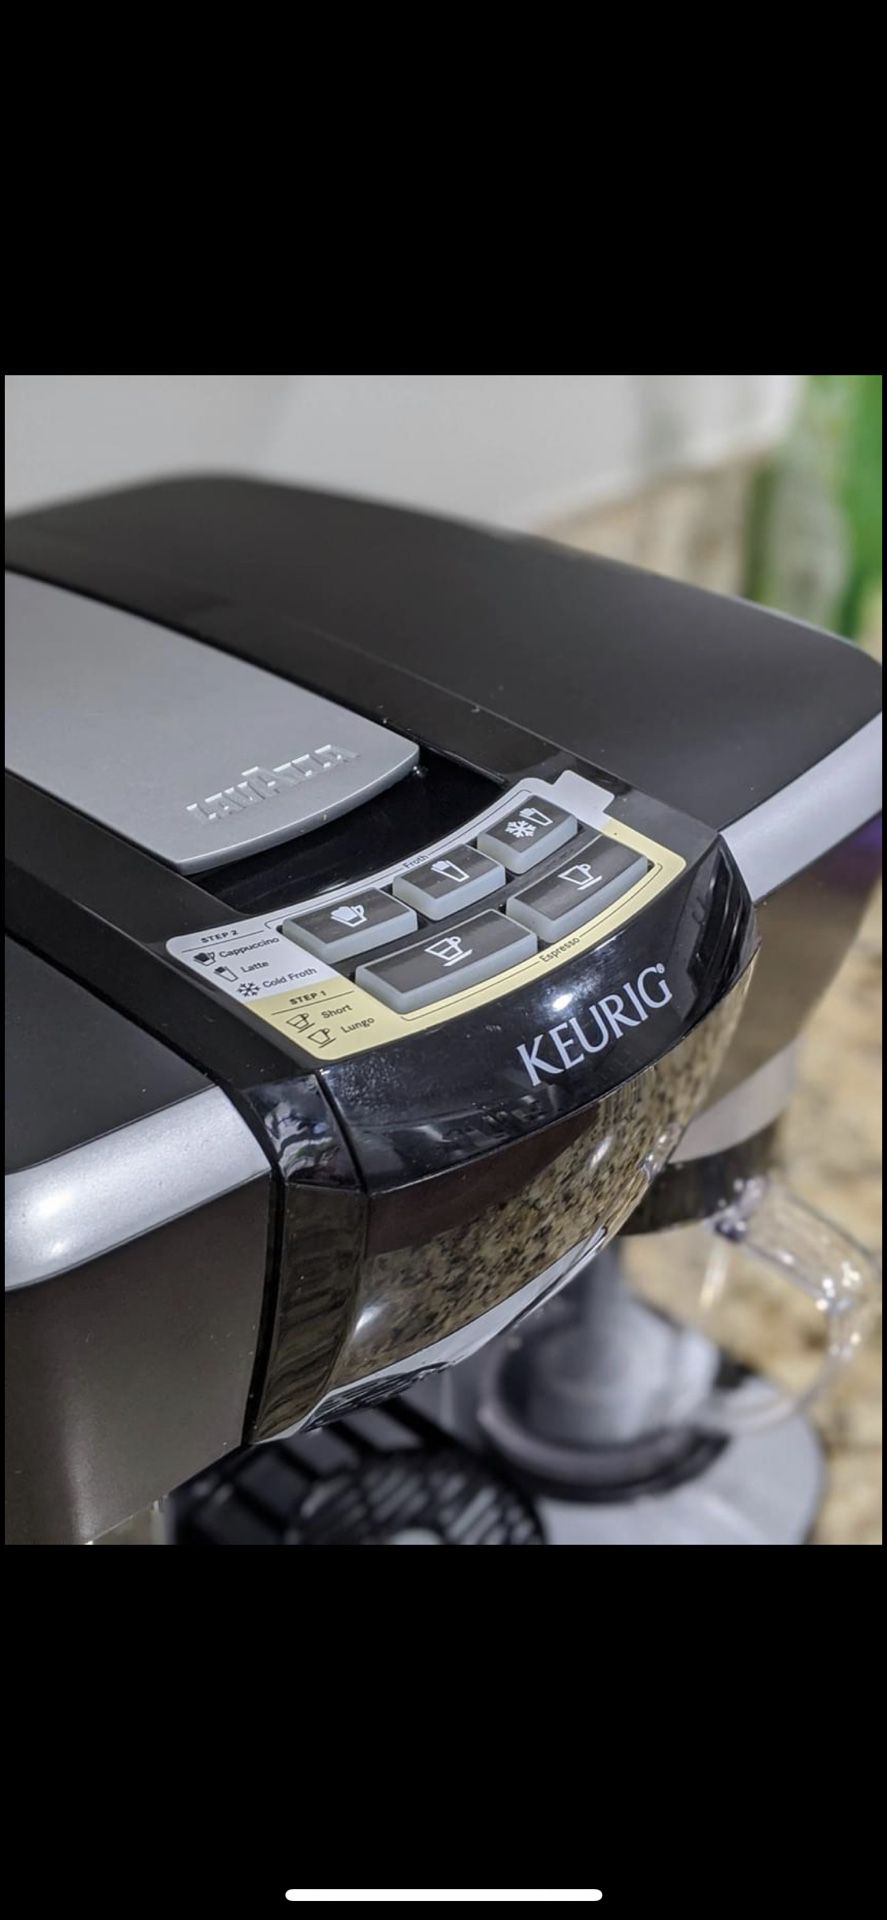 Keurig Best Coffee making system for Espresso Lovers